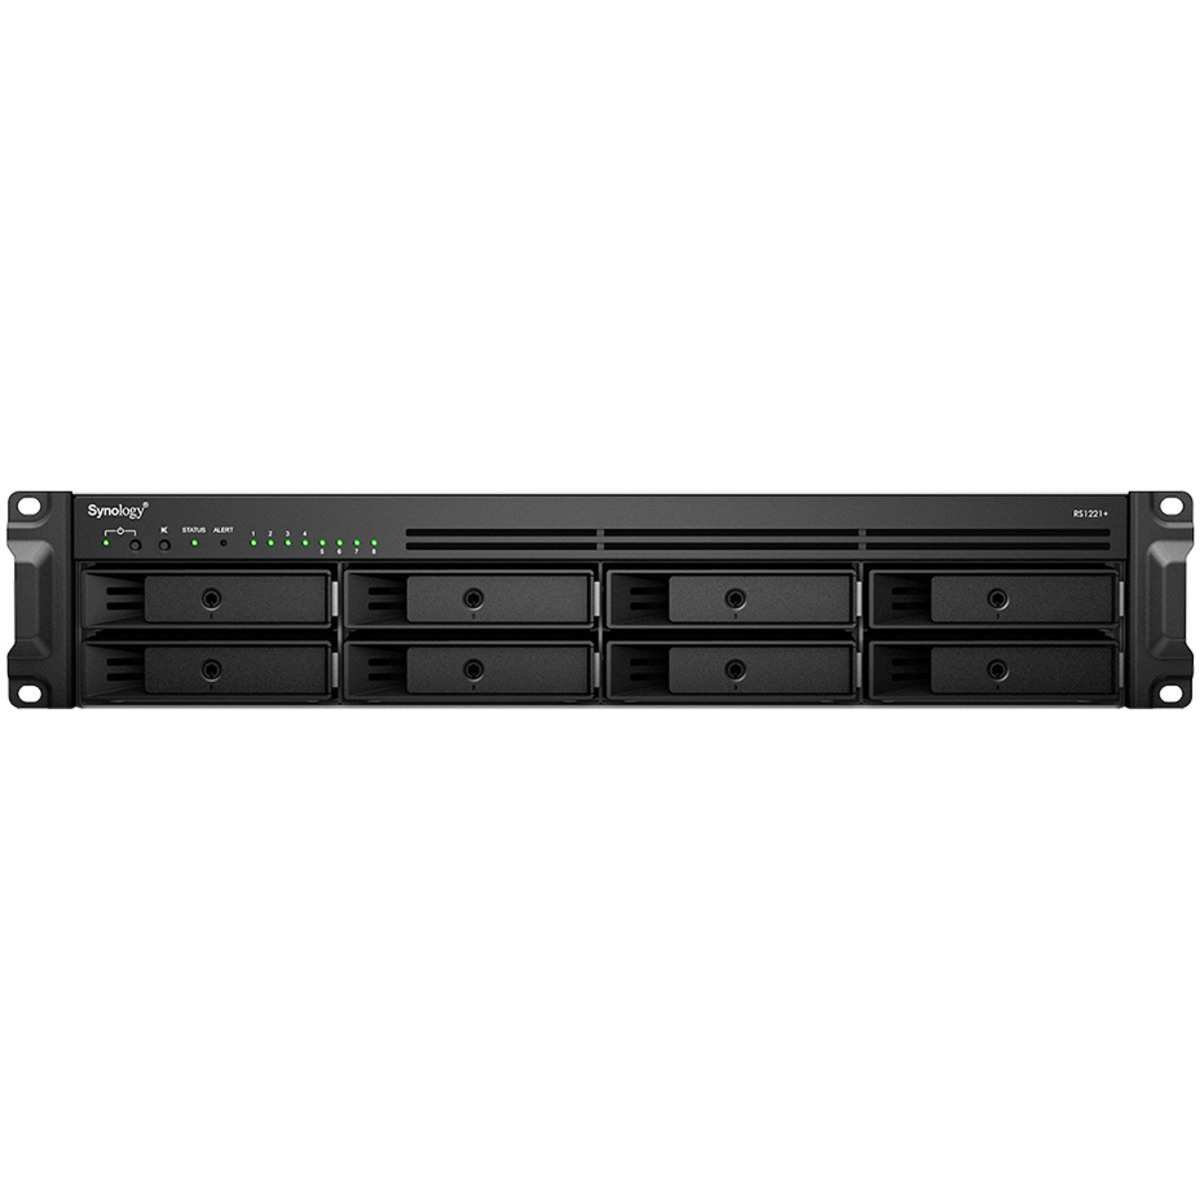 Synology RackStation RS1221RP+ 72tb 8-Bay RackMount Multimedia / Power User / Business NAS - Network Attached Storage Device 4x18tb Seagate EXOS X18 ST18000NM000J 3.5 7200rpm SATA 6Gb/s HDD ENTERPRISE Class Drives Installed - Burn-In Tested - FREE RAM UPGRADE RackStation RS1221RP+